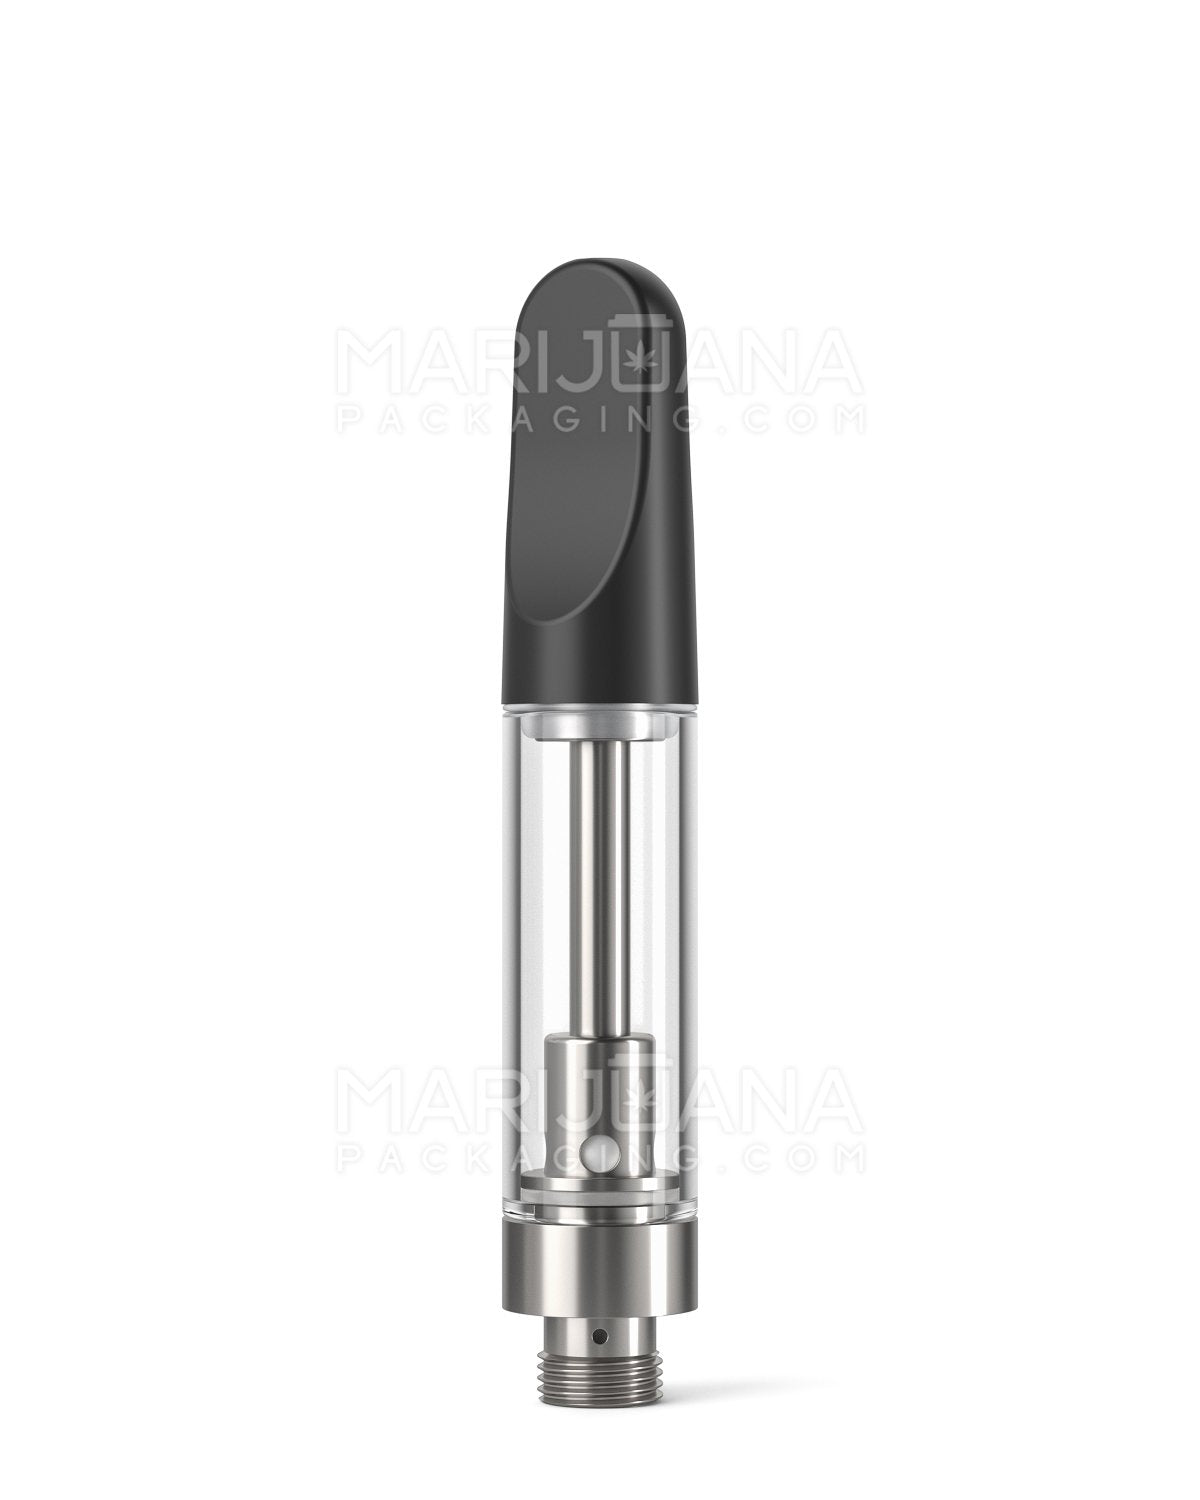 CCELL | Liquid6 Reactor Glass Cartridge with Black Plastic Mouthpiece | 1mL - Screw On | Sample - 1